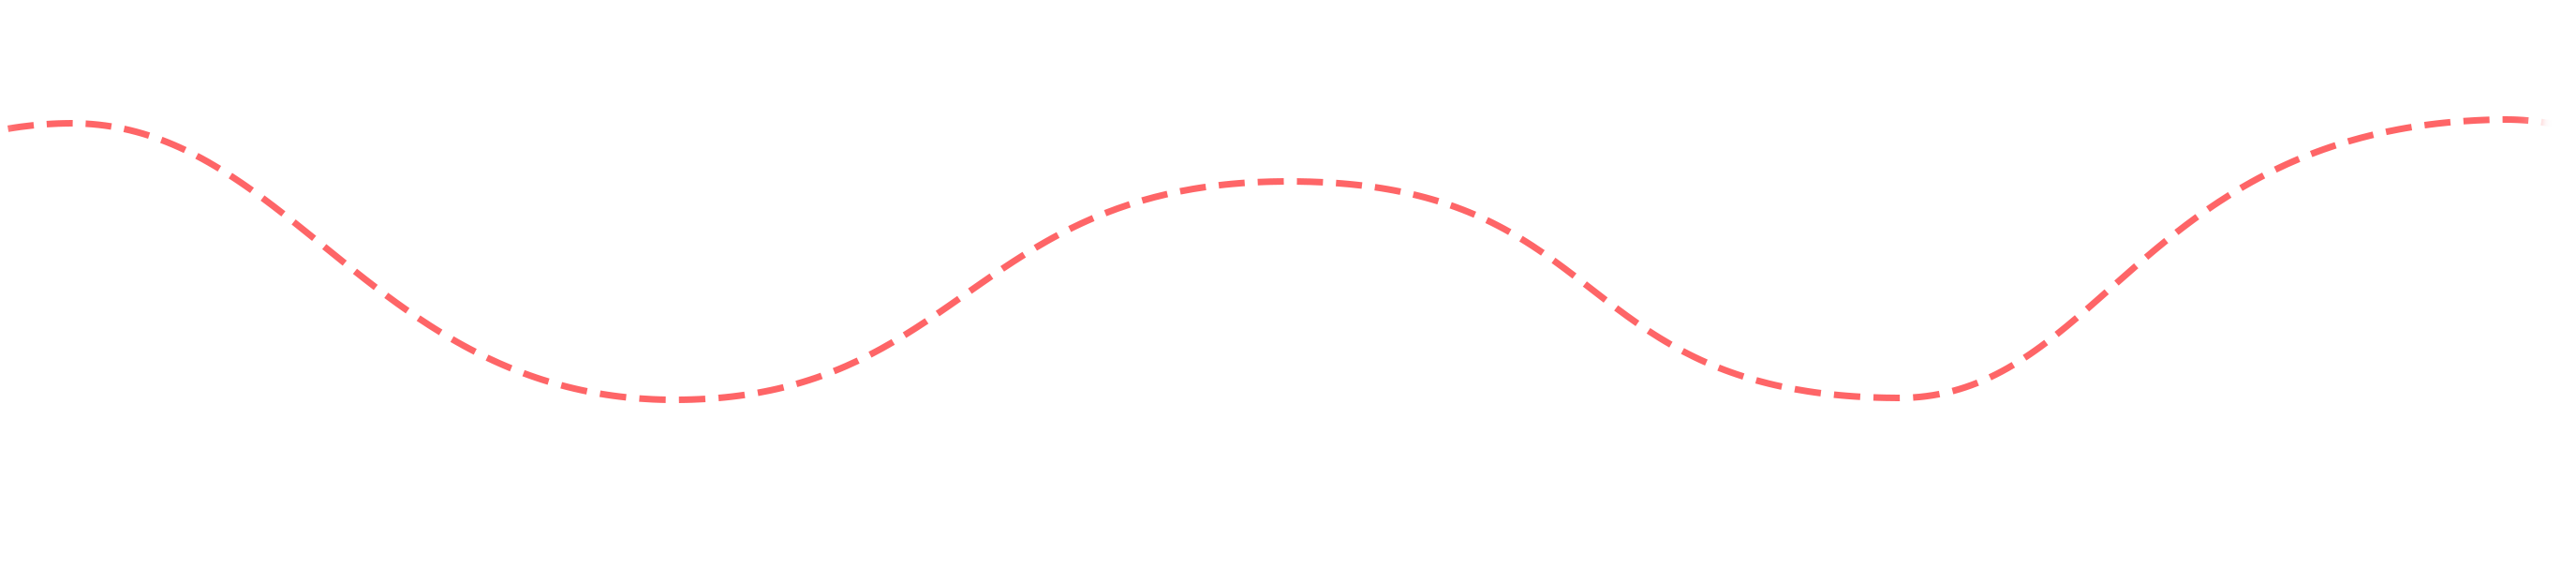 The curved line for the Seed Kindness Fund timeline